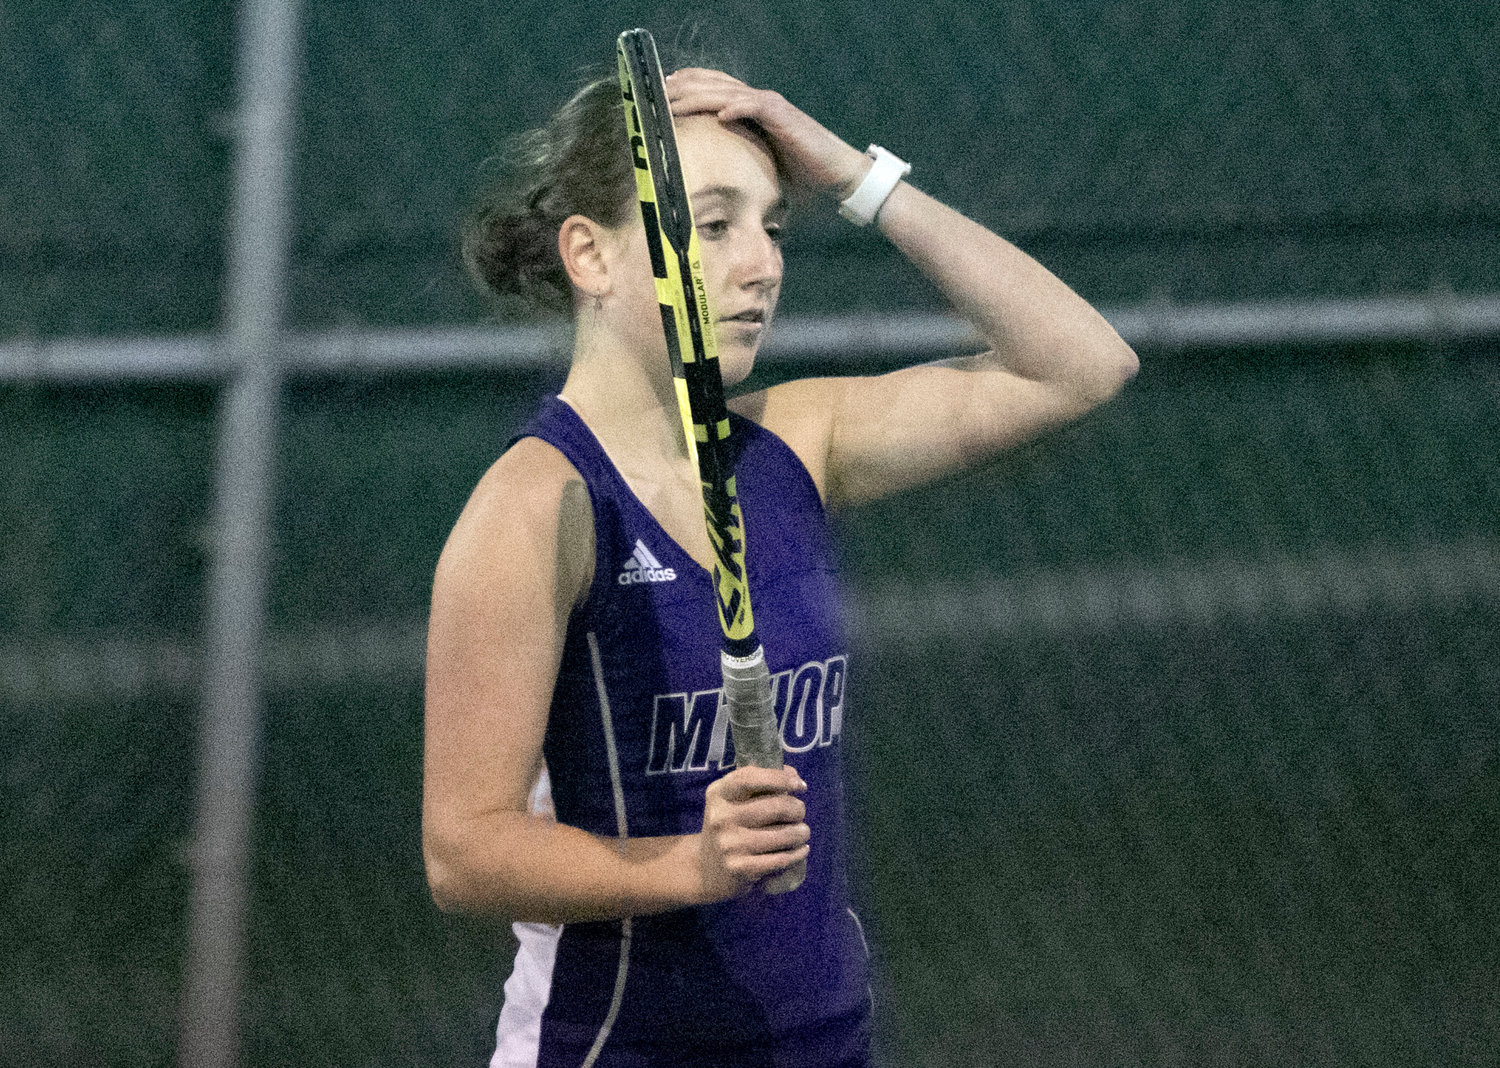 Huskies third singles player sophomore Cate Merriam plays in a tie breaker for the match against Prout's Breck O’Connor.